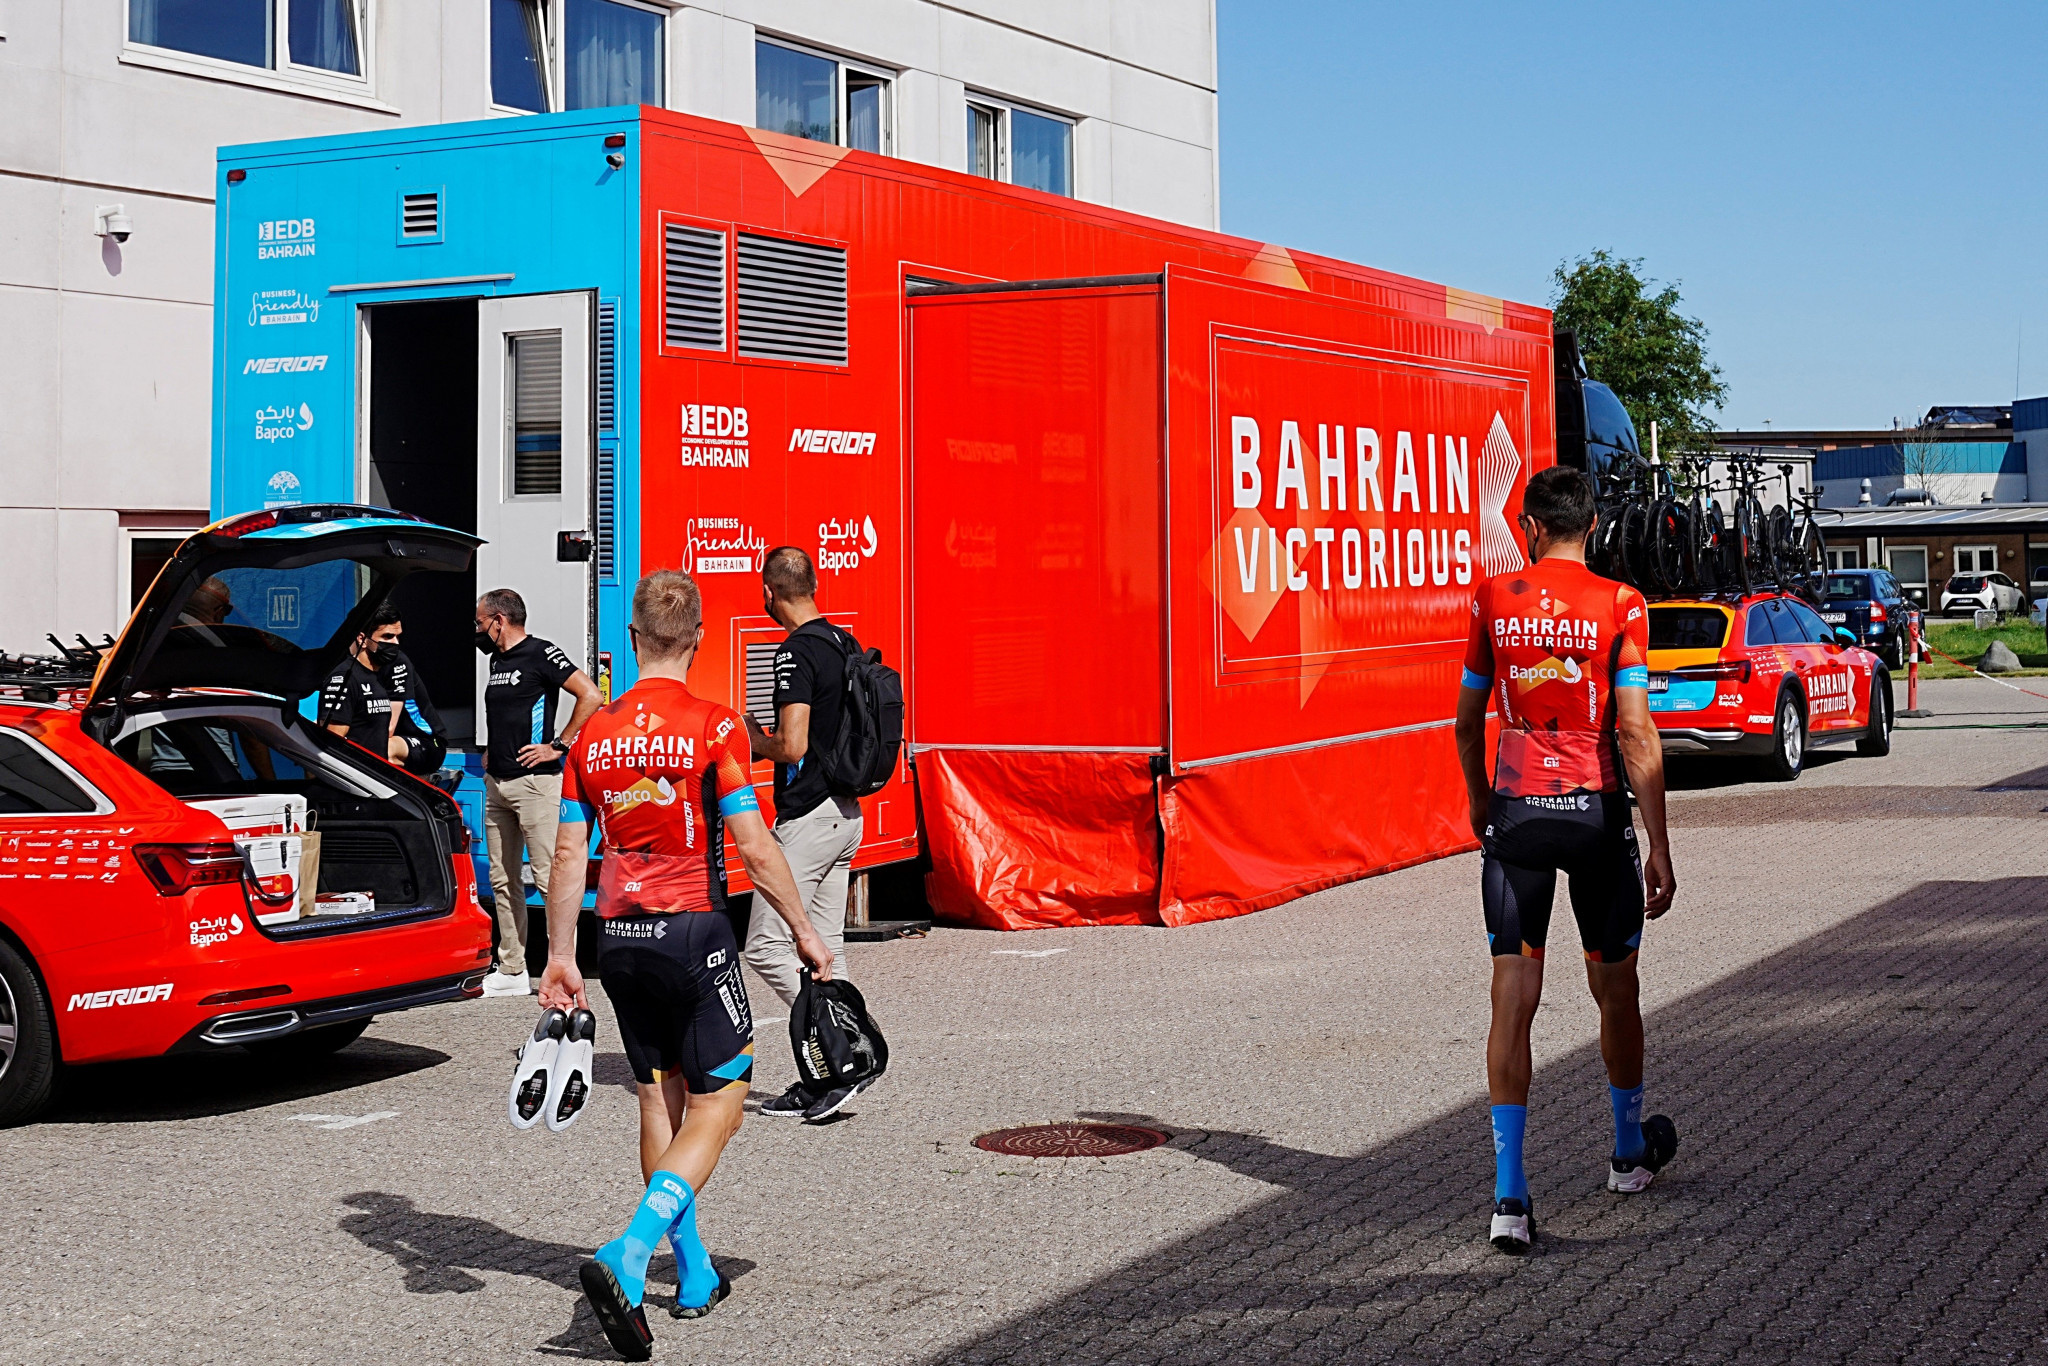 Bahrain Victorious' preparations for this year's Tour de France has been disrupted by two police raids in a week ©Getty Images